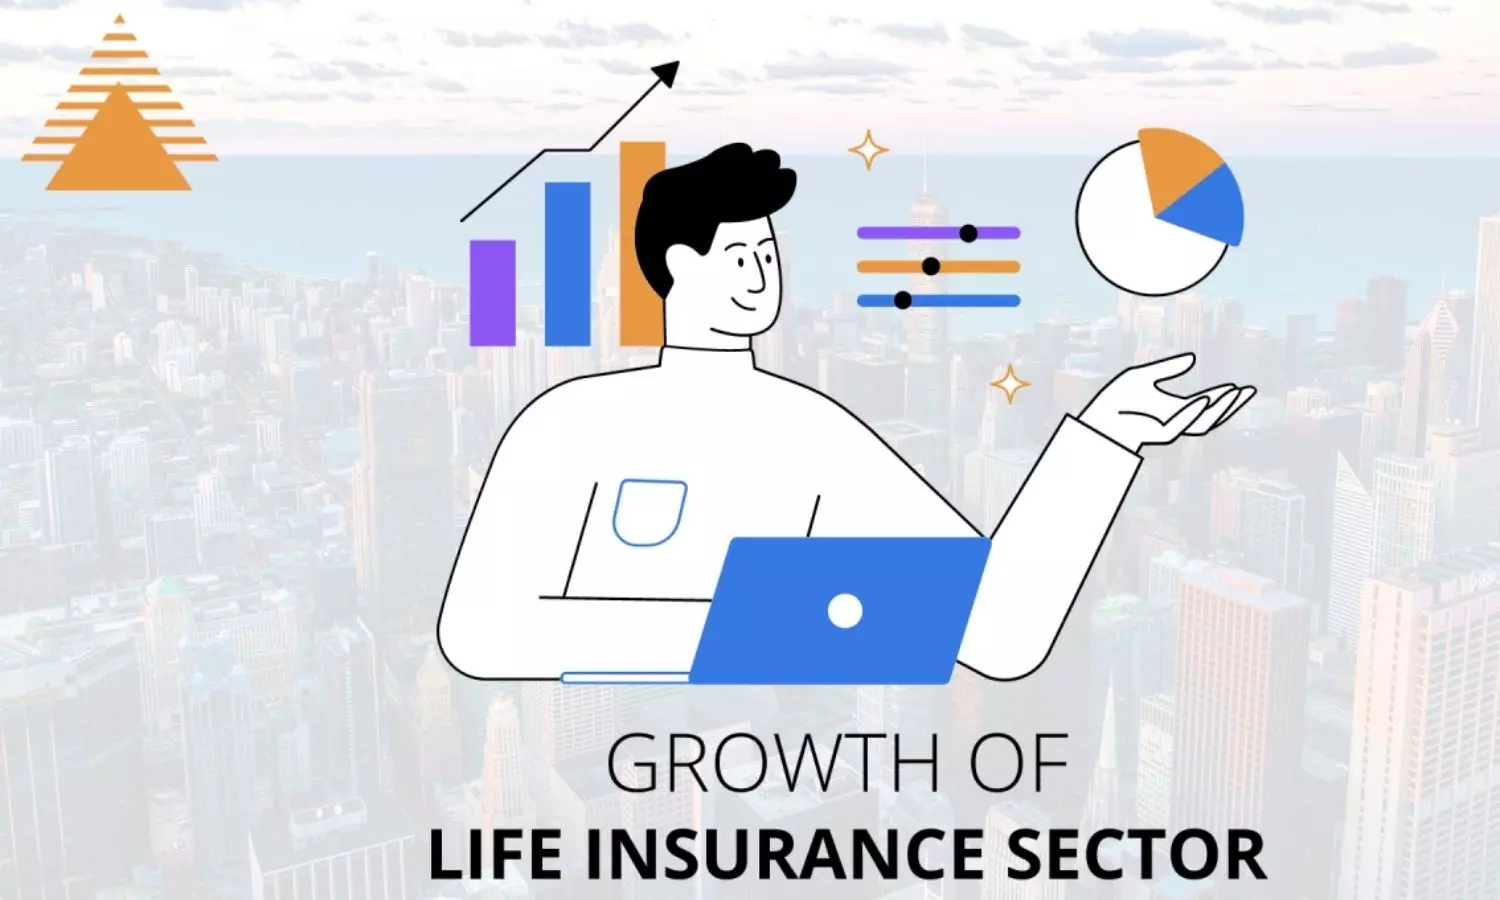 Indian Life Insurance Industry Outlook In the next 3 to 5 years